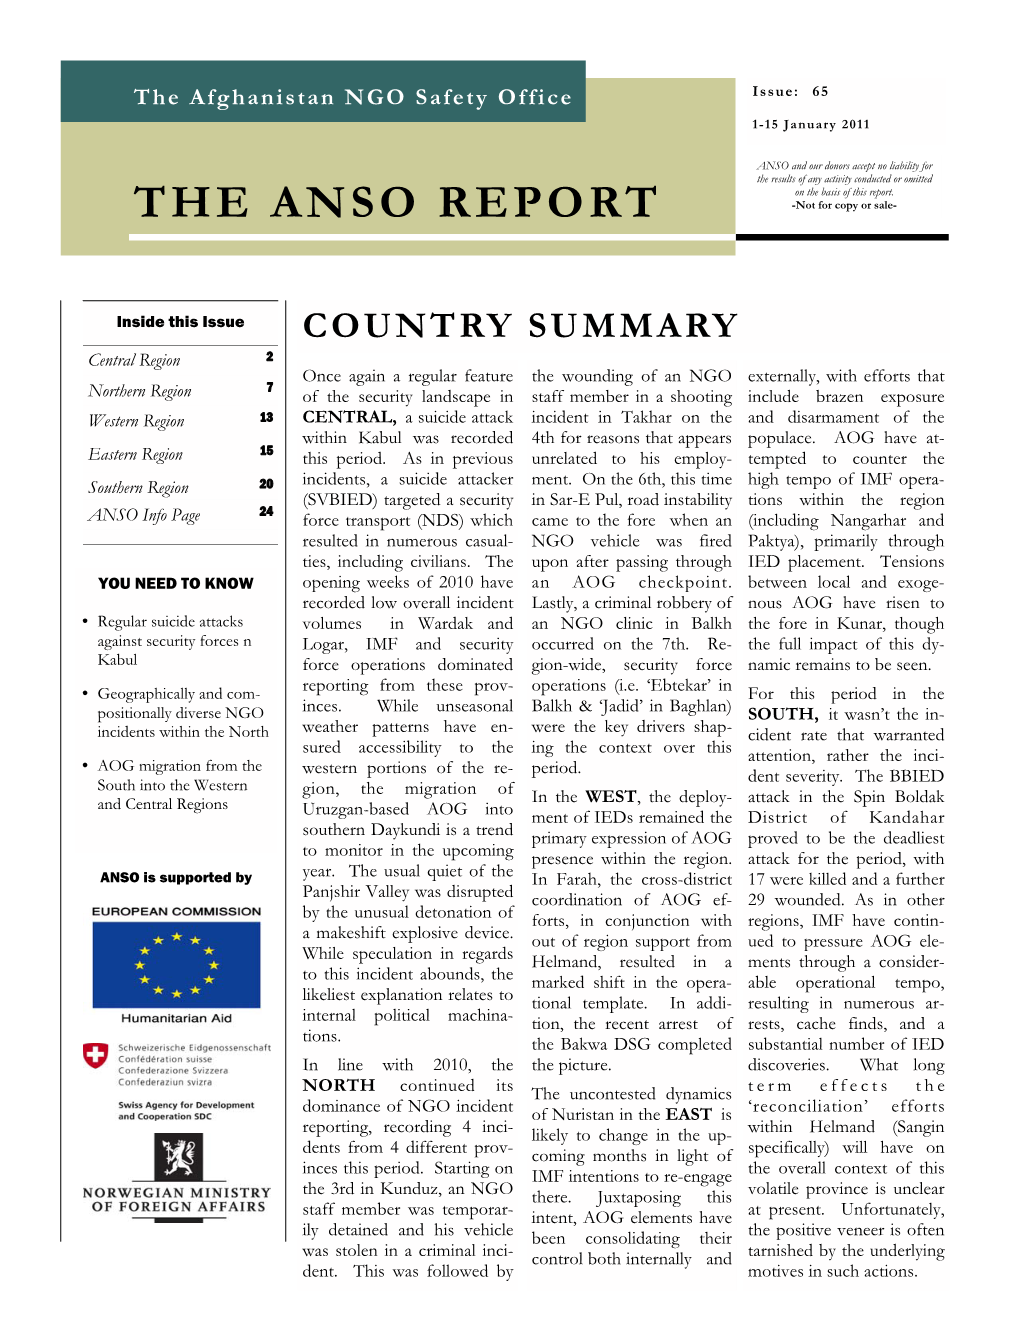 The ANSO Report (1-15 January 2011)